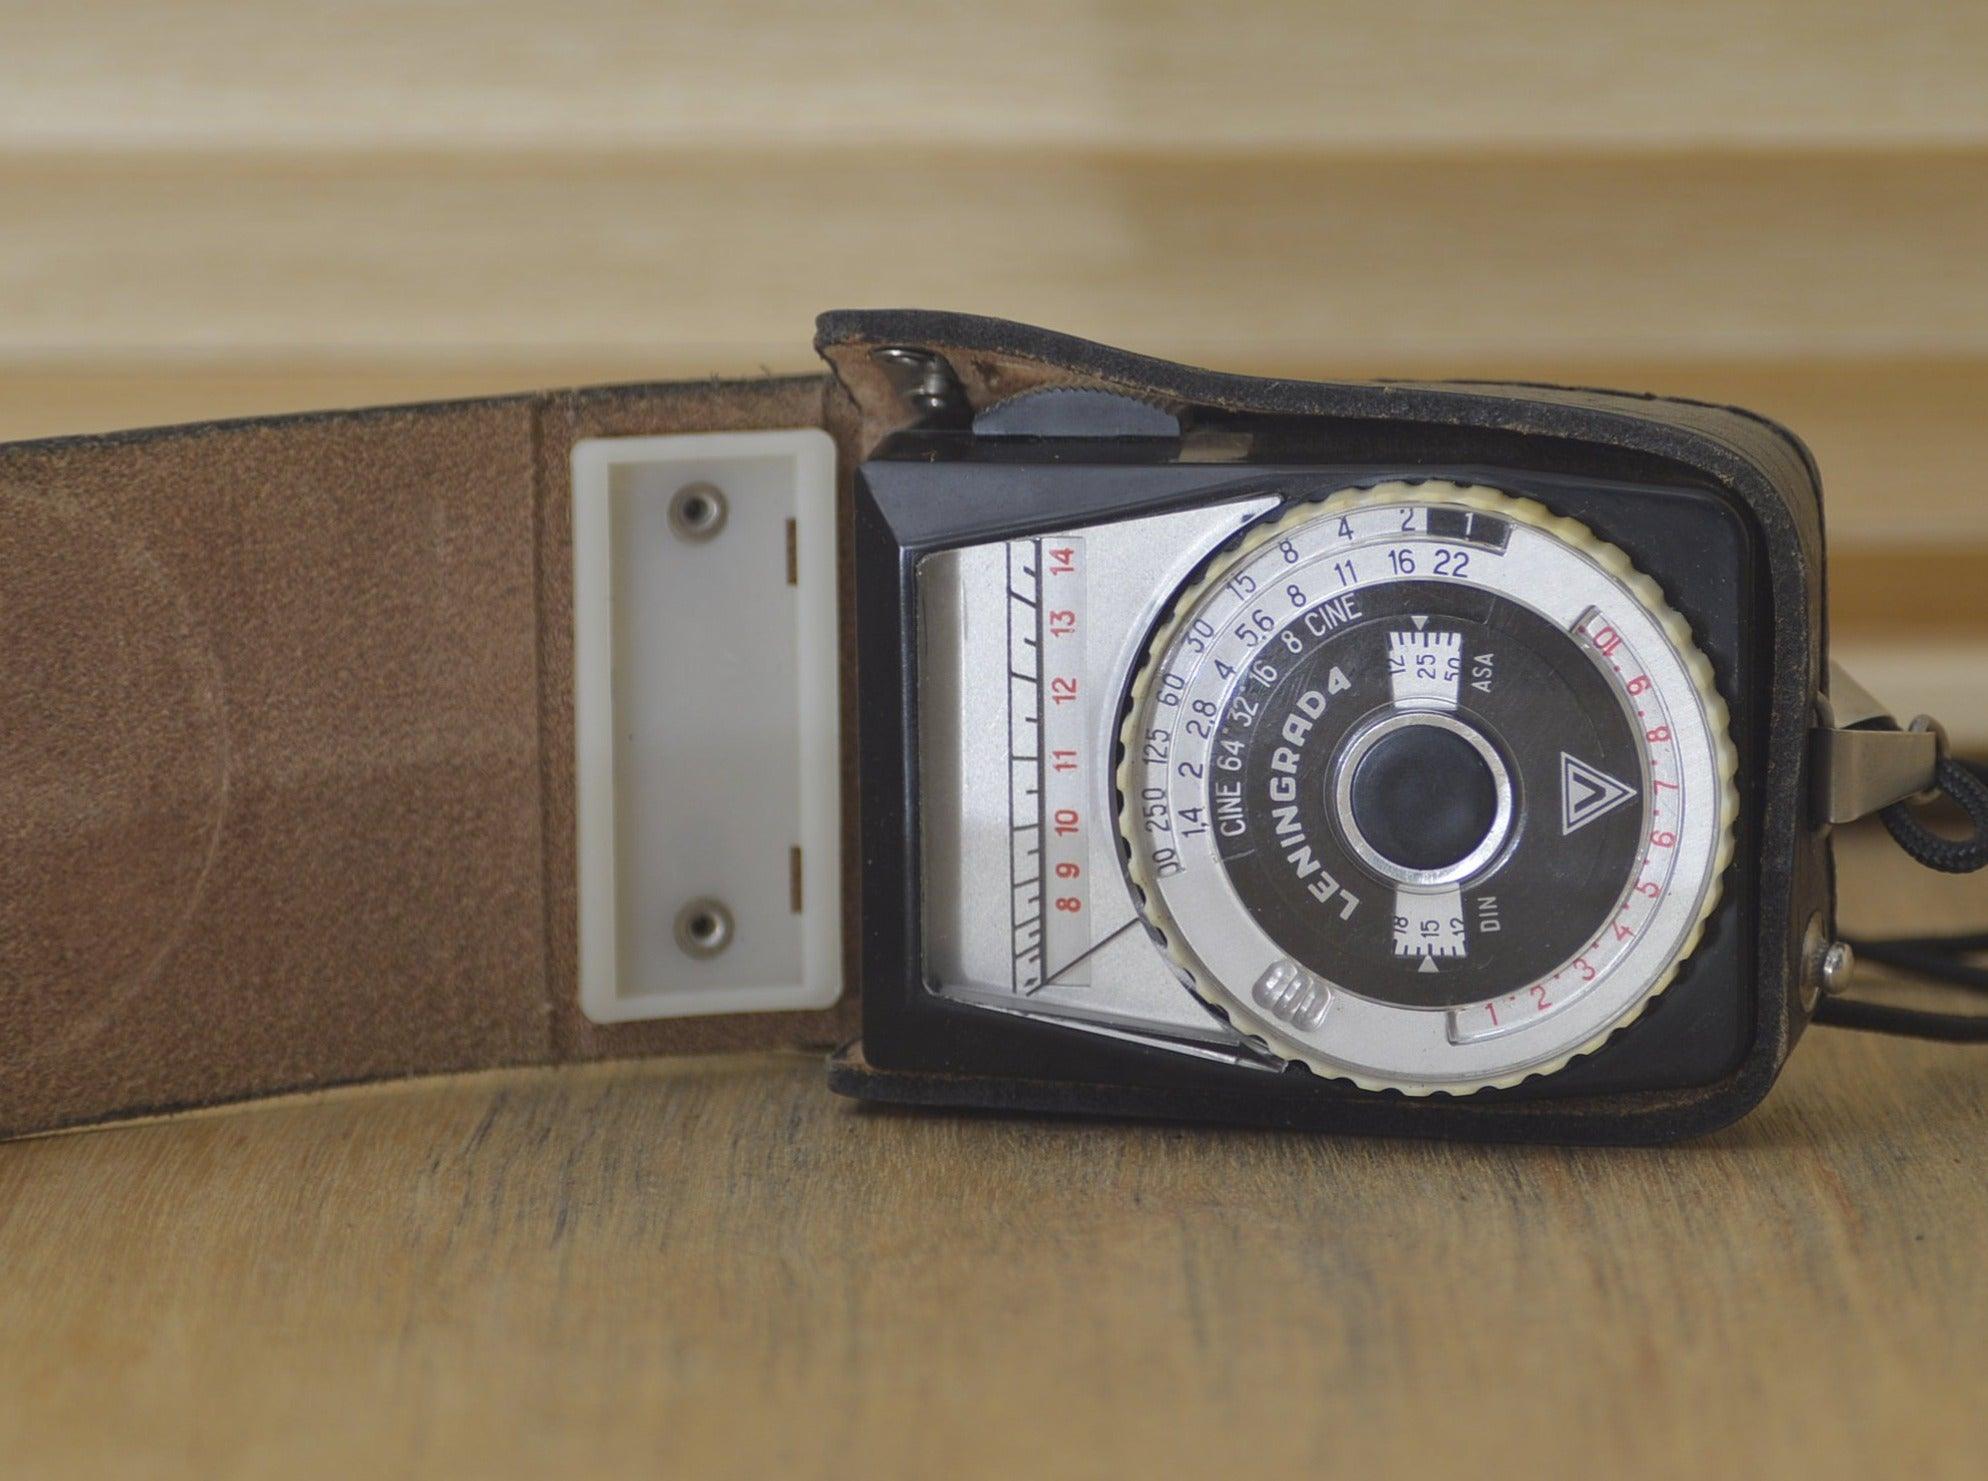 Lovely Leningrad 4 light meter with case. A lovely vintage addition to any photographers kit. Perfect for tricky light situations - RewindCameras quality vintage cameras, fully tested and ser